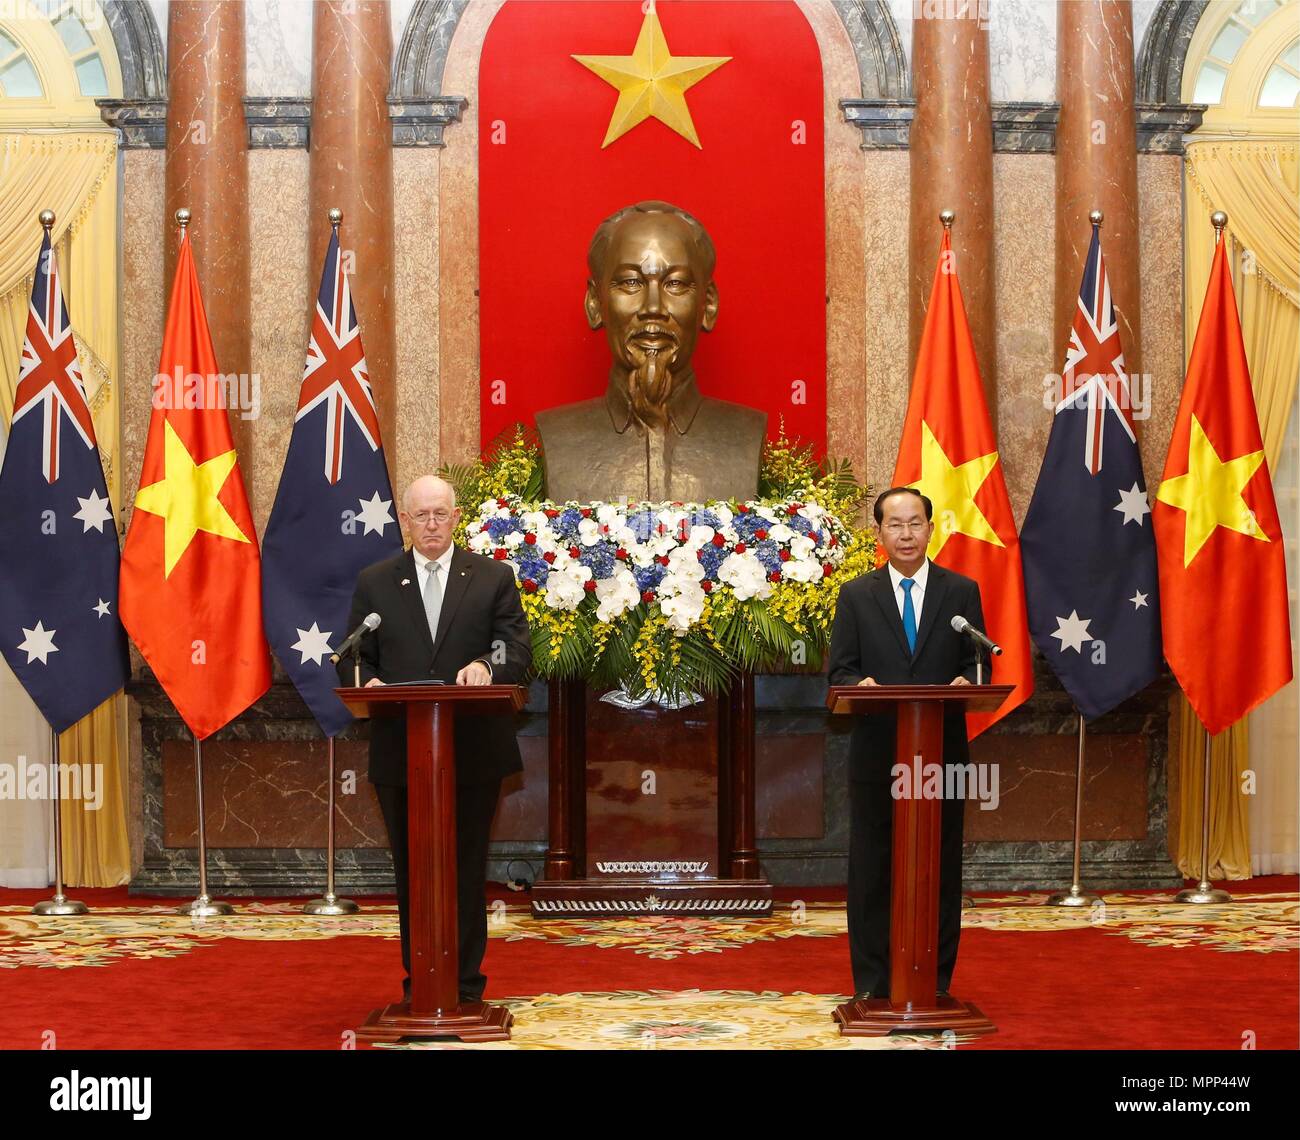 Hanoi, Vietnam. 24th May, 2018. Vietnamese President Tran Dai Quang (R) and Australian Governor-General Peter Cosgrove attend a press conference in Hanoi, capital of Vietnam, on May 24, 2018. Credit: VNA/Xinhua/Alamy Live News Stock Photo